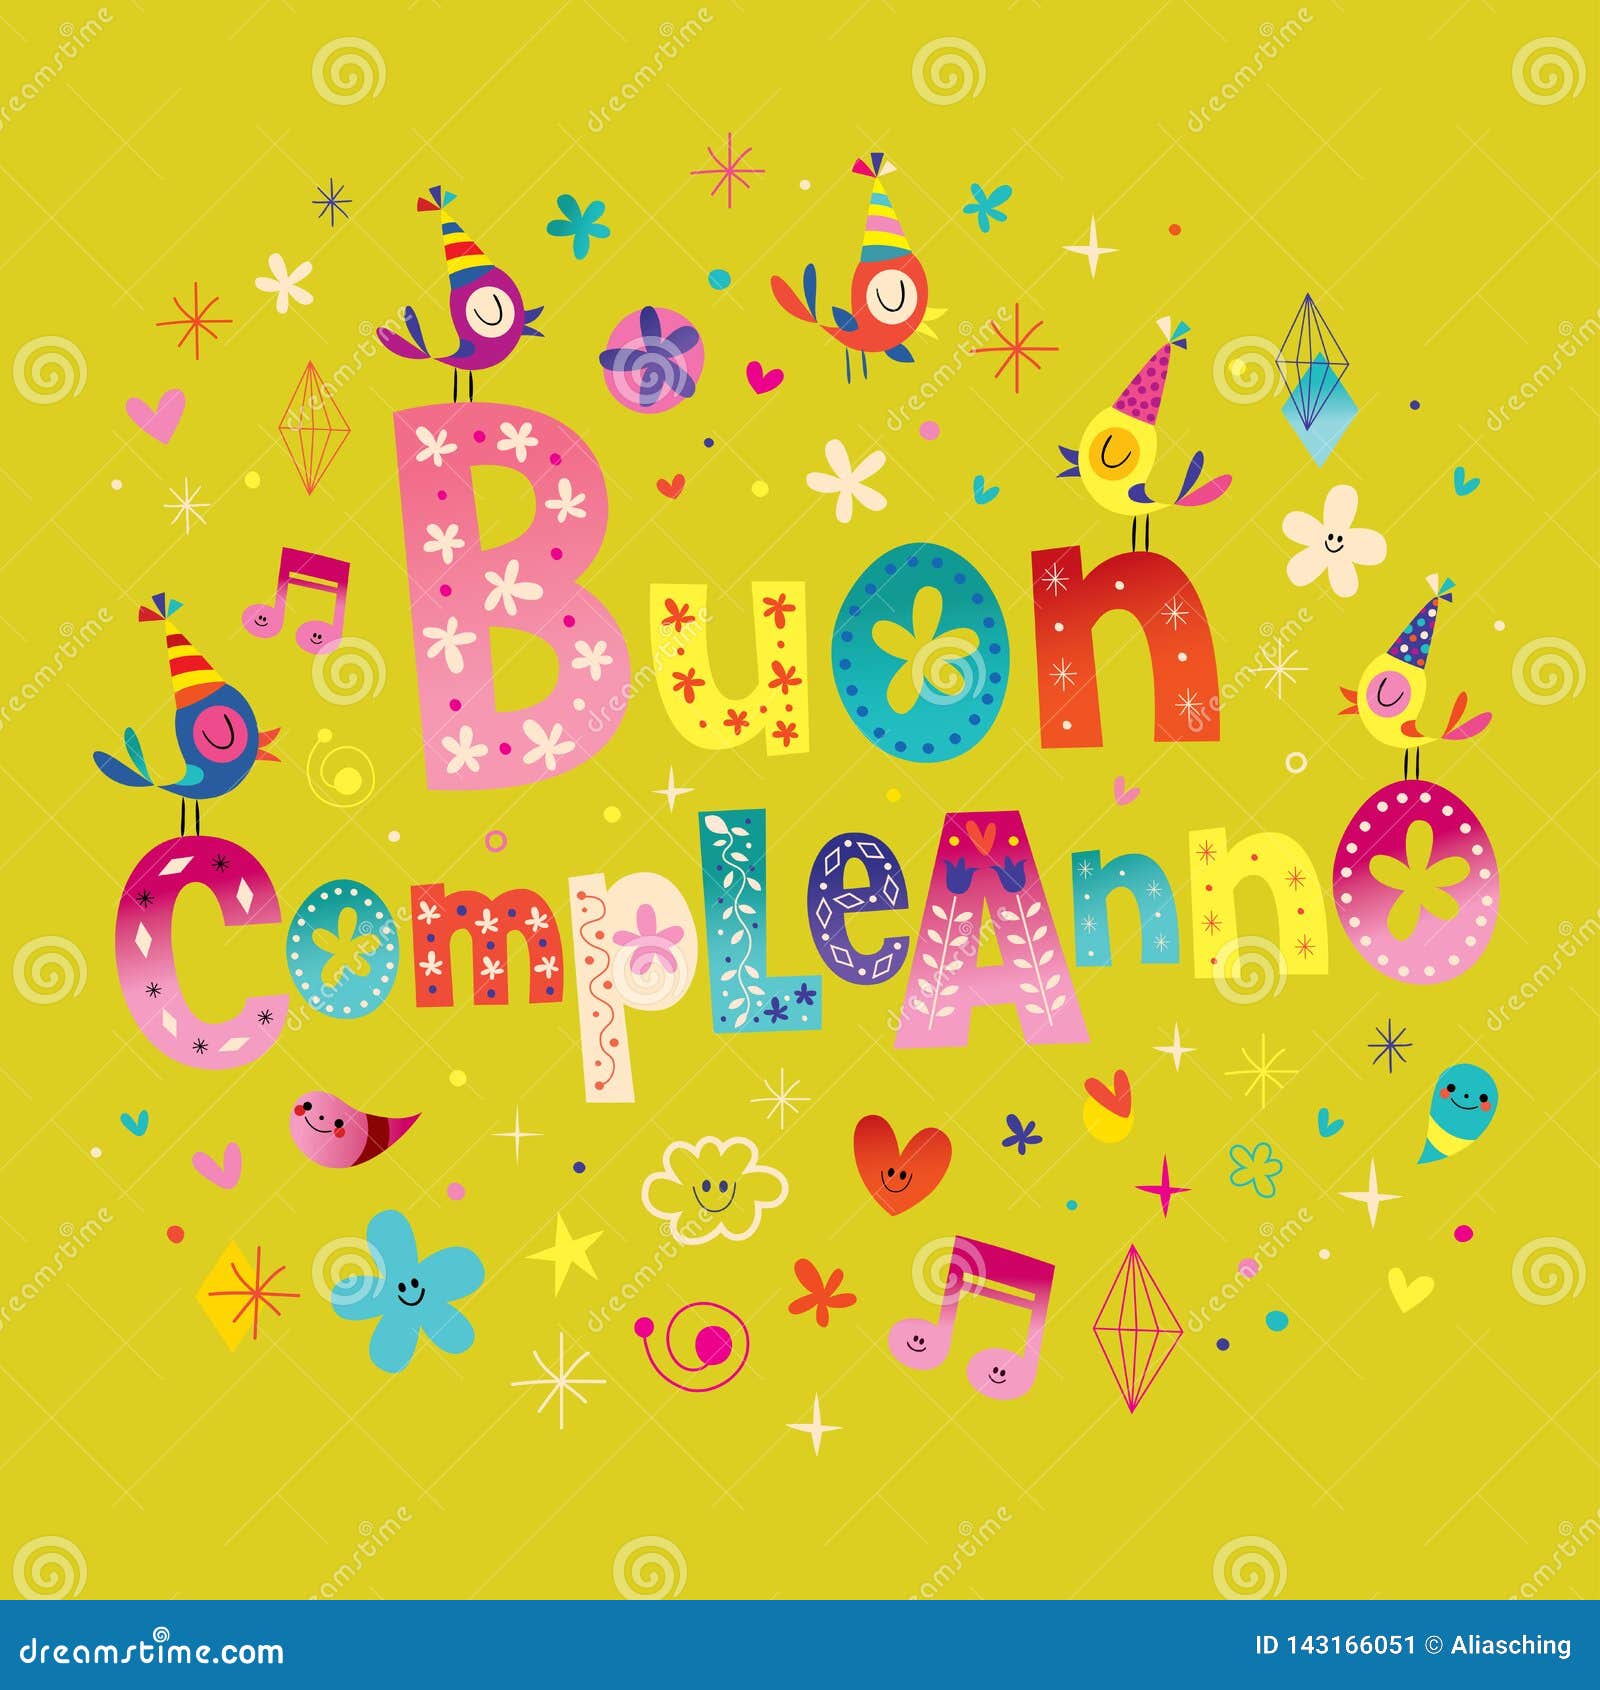 Illustration about Buon compleanno Happy birthday in Italian greeting card....